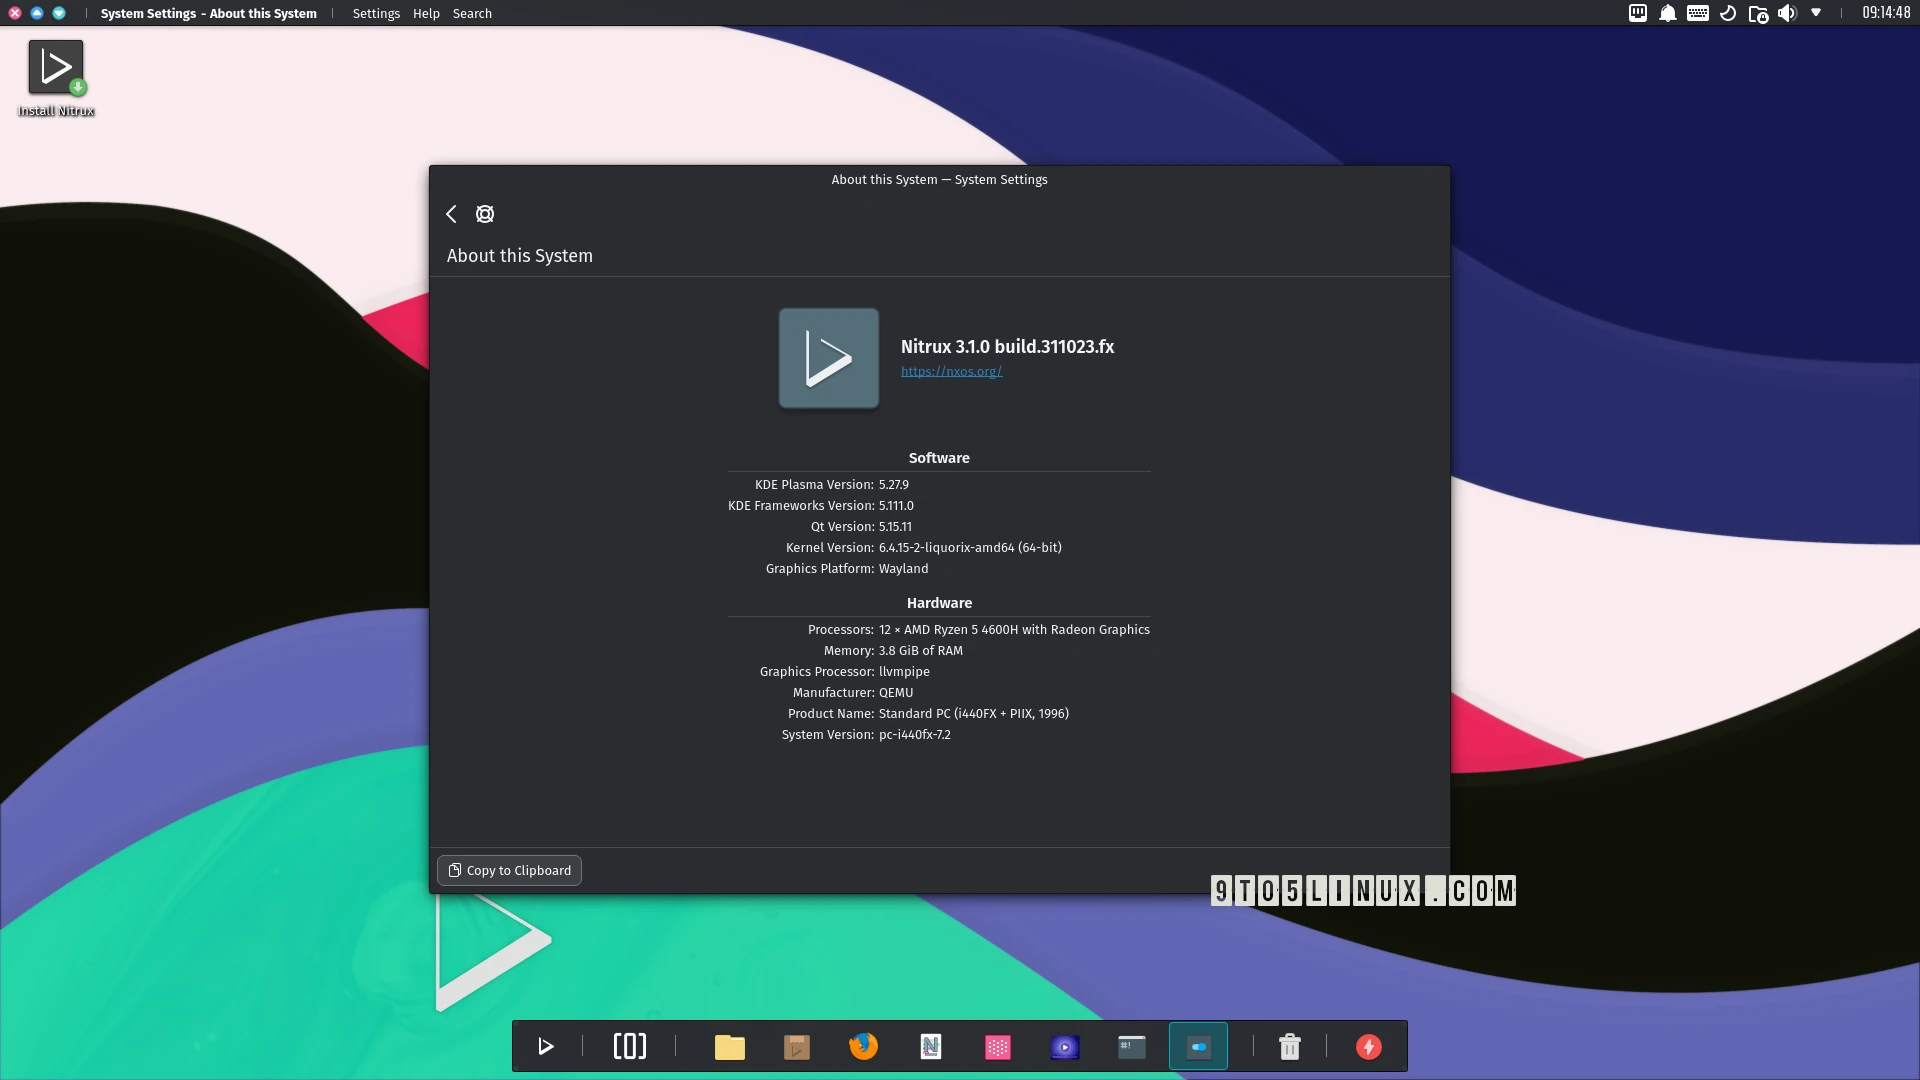 Immutable Distro Nitrux 3.1 Brings Revamped Upgrade Utility, Latest KDE Software